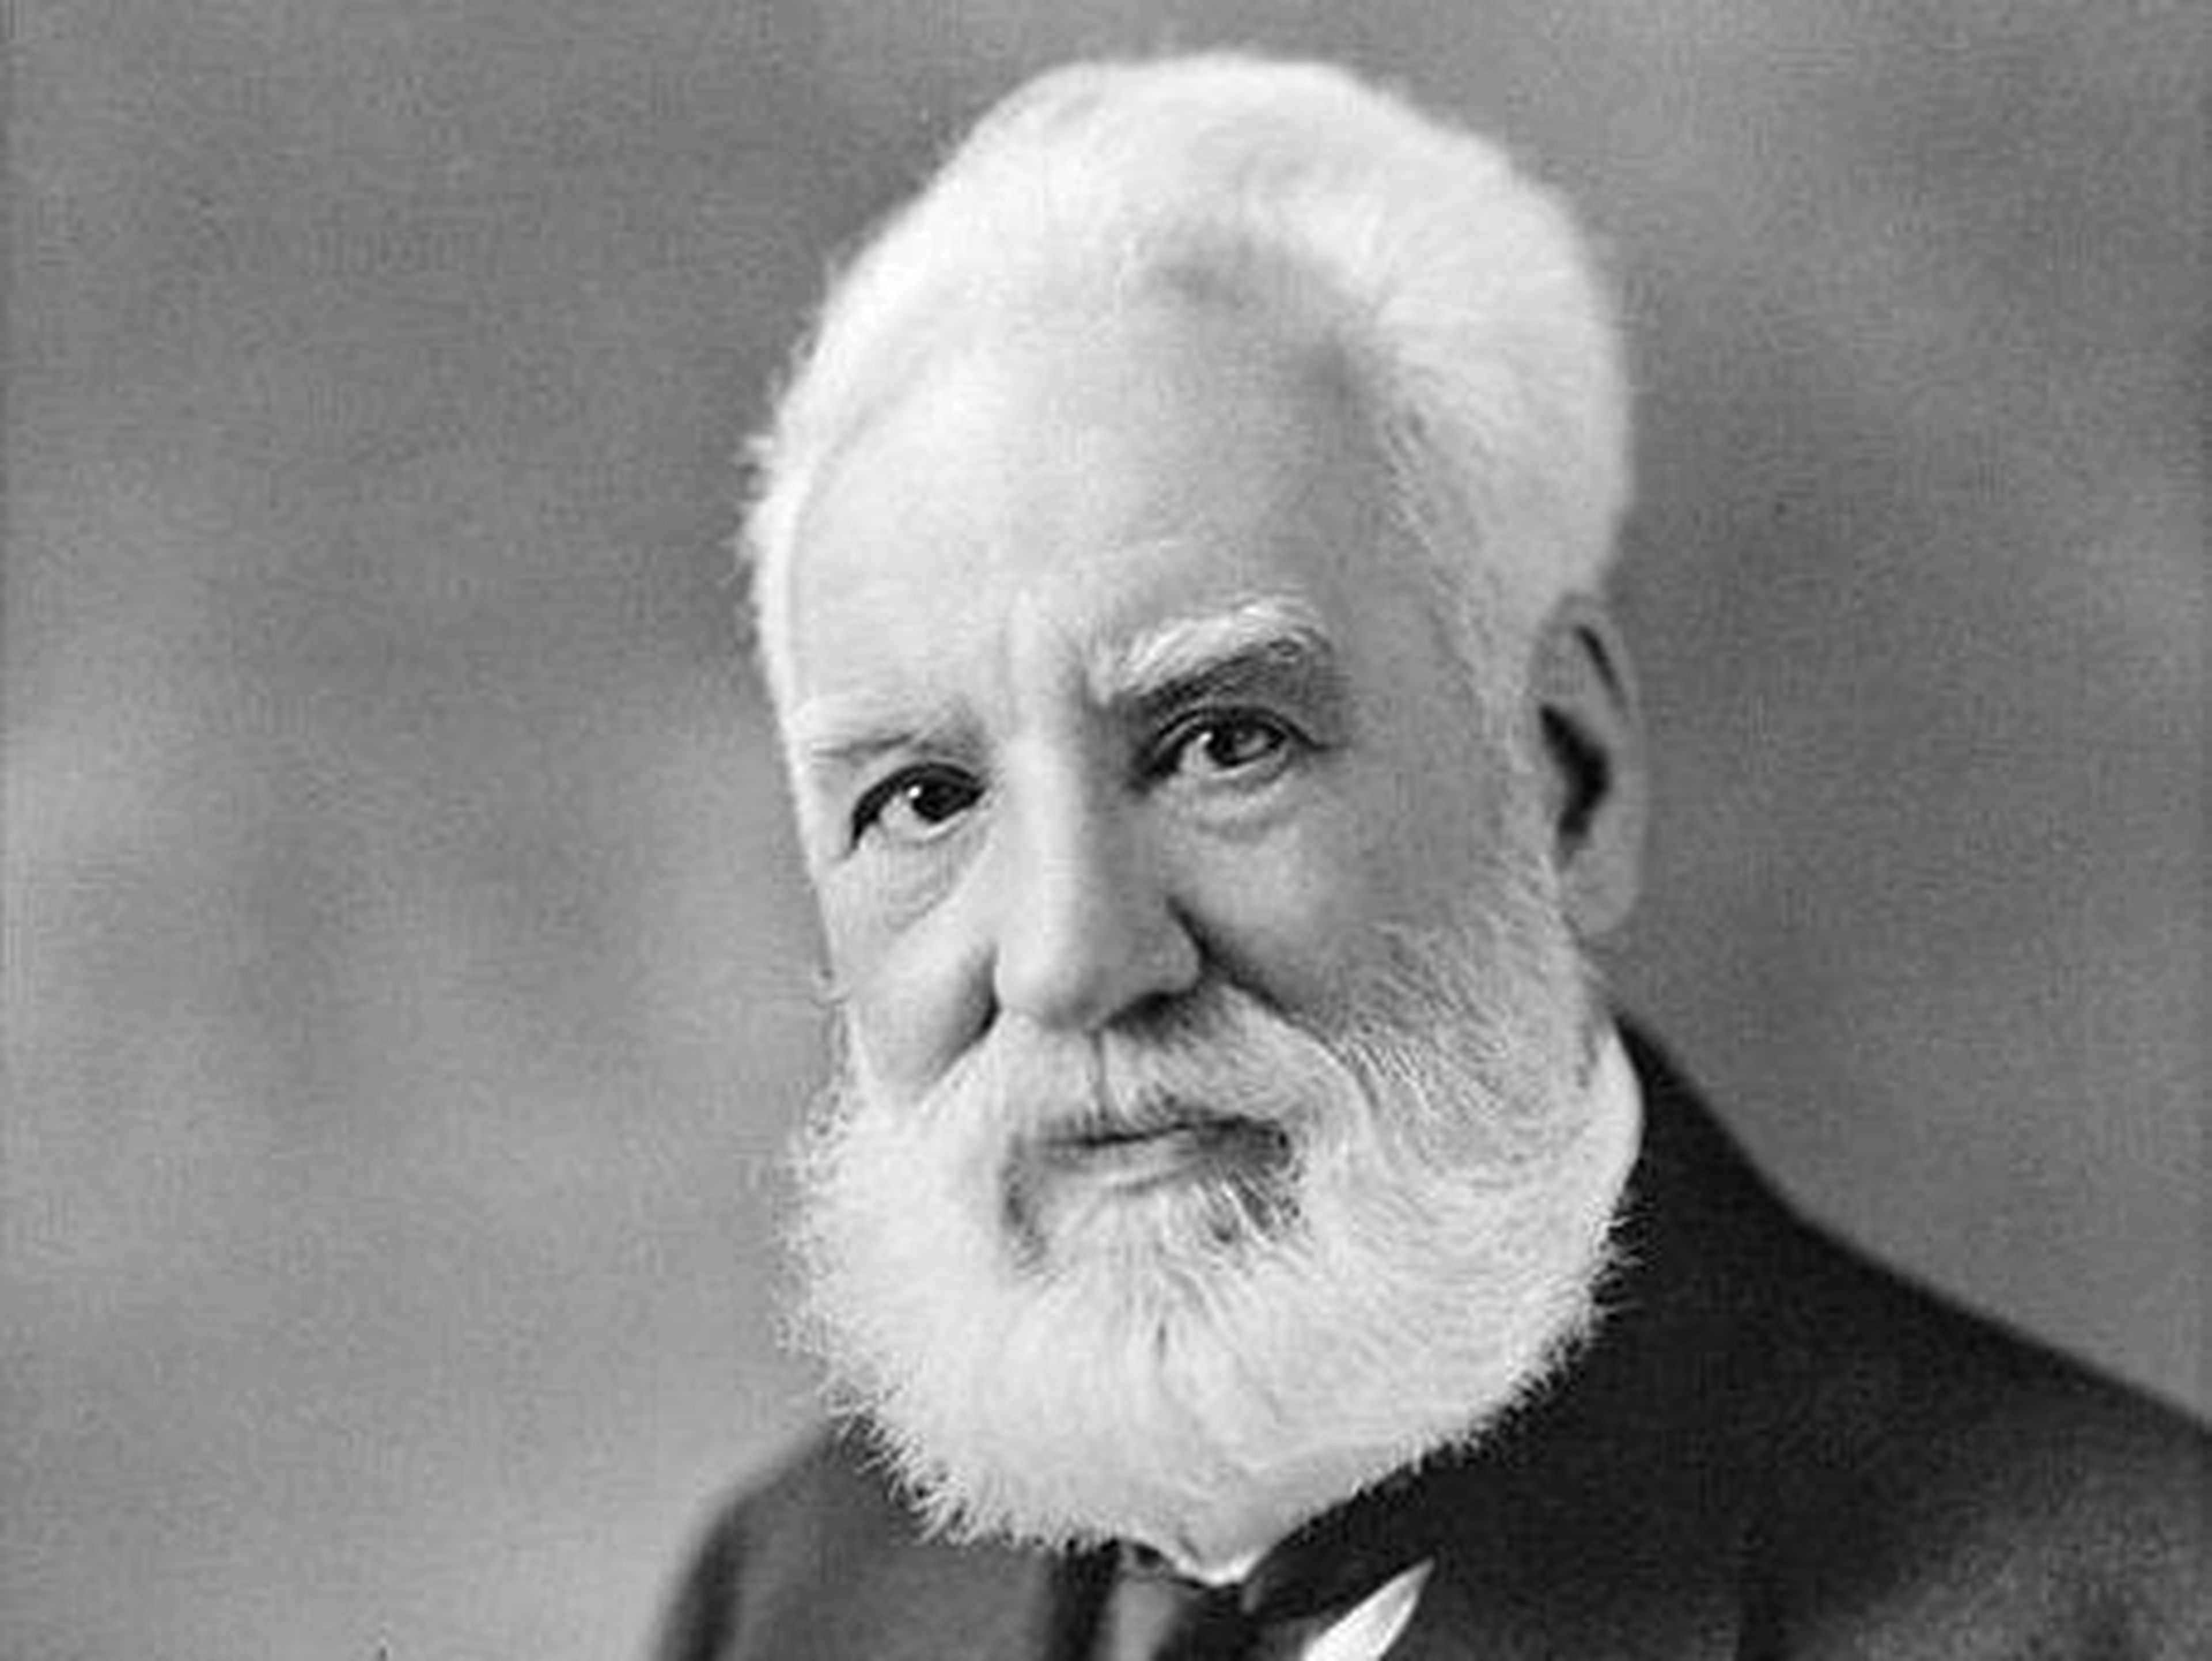 Alexander Graham Bell was home-schooled by his mother until he was 11 years old.